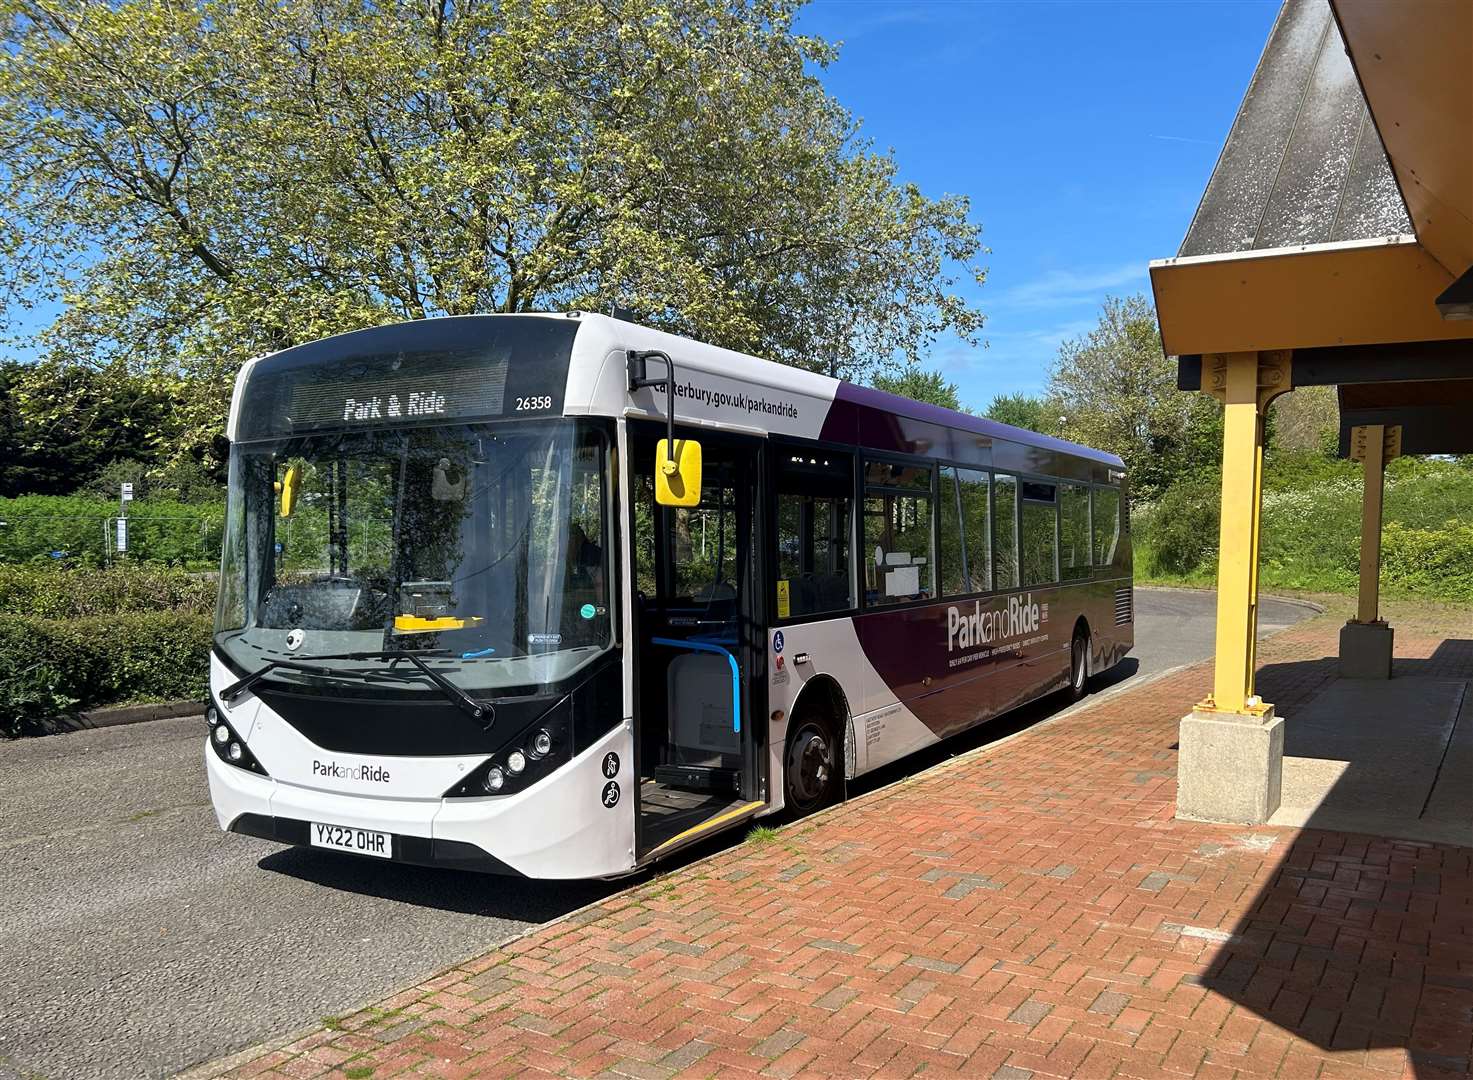 Canterbury City Council spent more than £200,000 to reopen Sturry Park and Ride